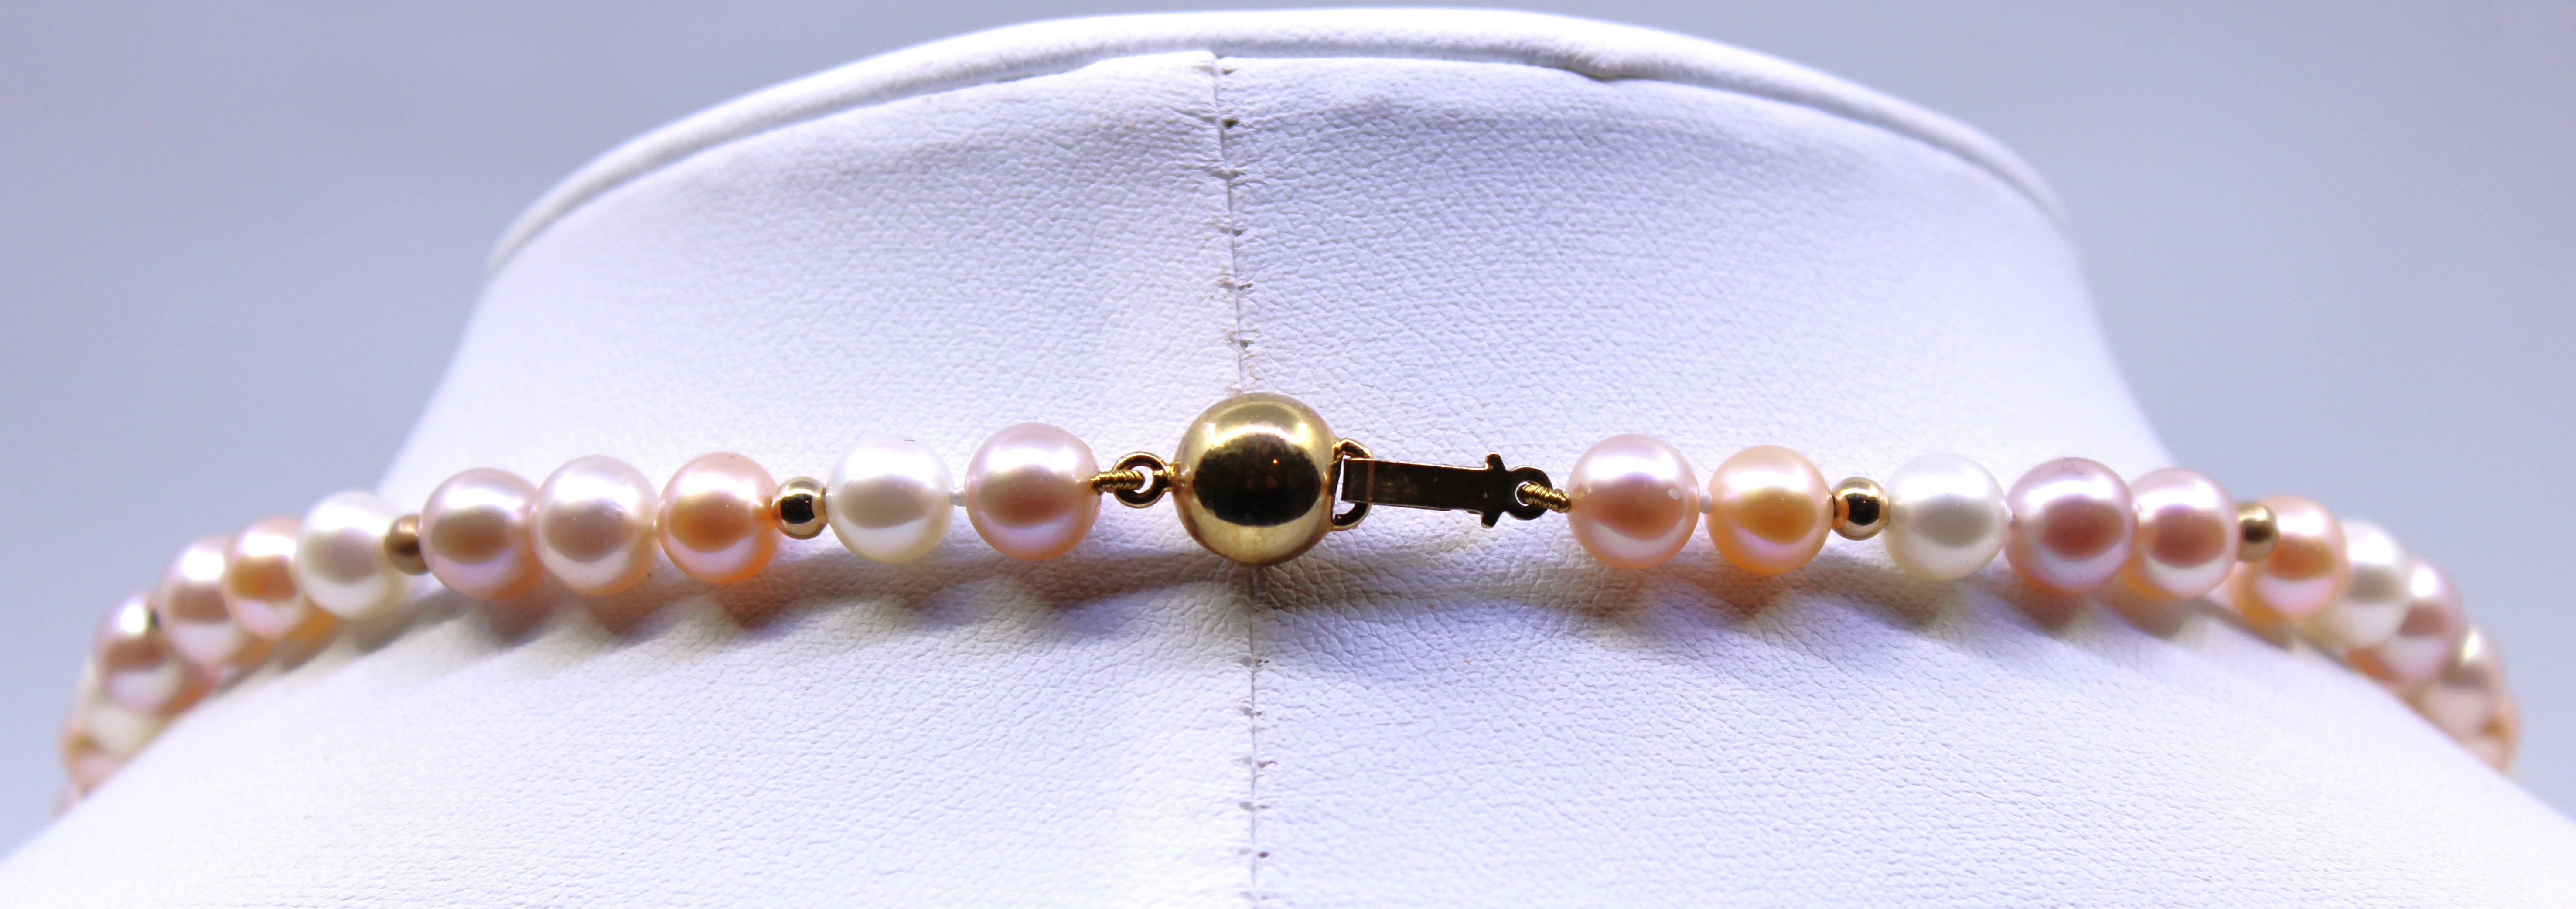 9ct Gold Cultured Pearl Necklace. The Necklace contains different tones of pink Cultured Pearls - Image 3 of 3